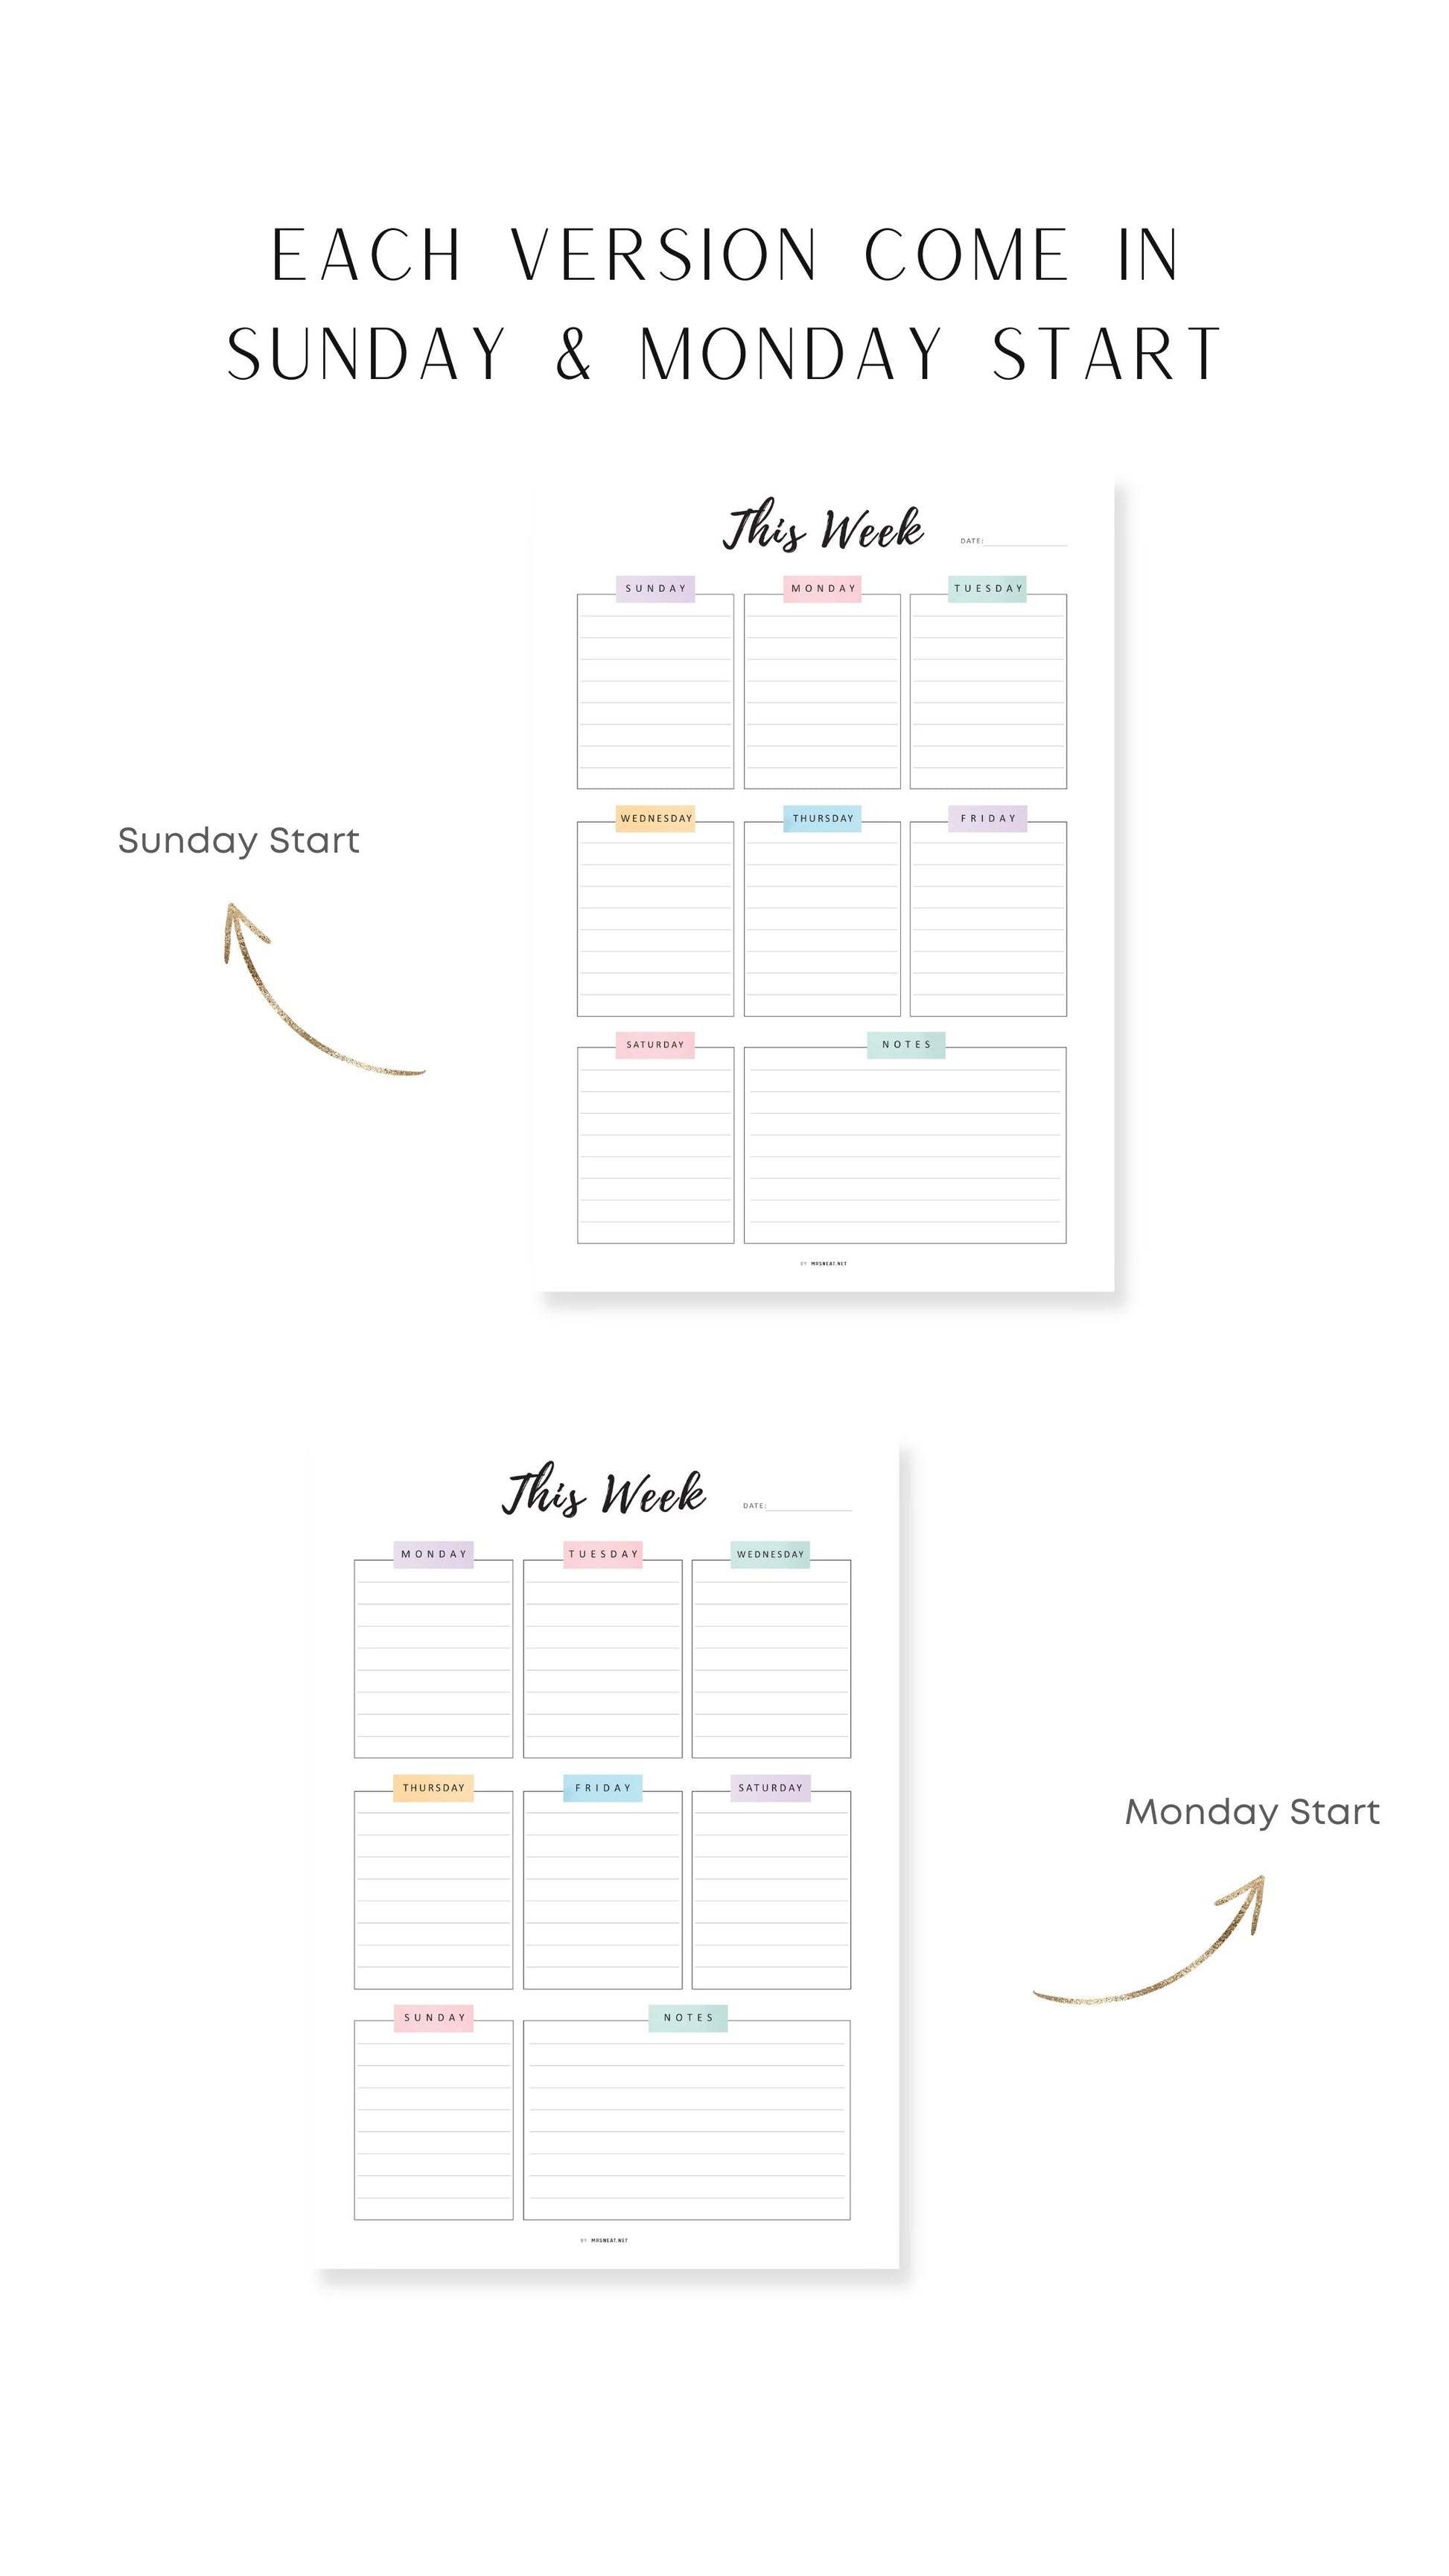 Sunday and Monday start colorful weekly planner template printable